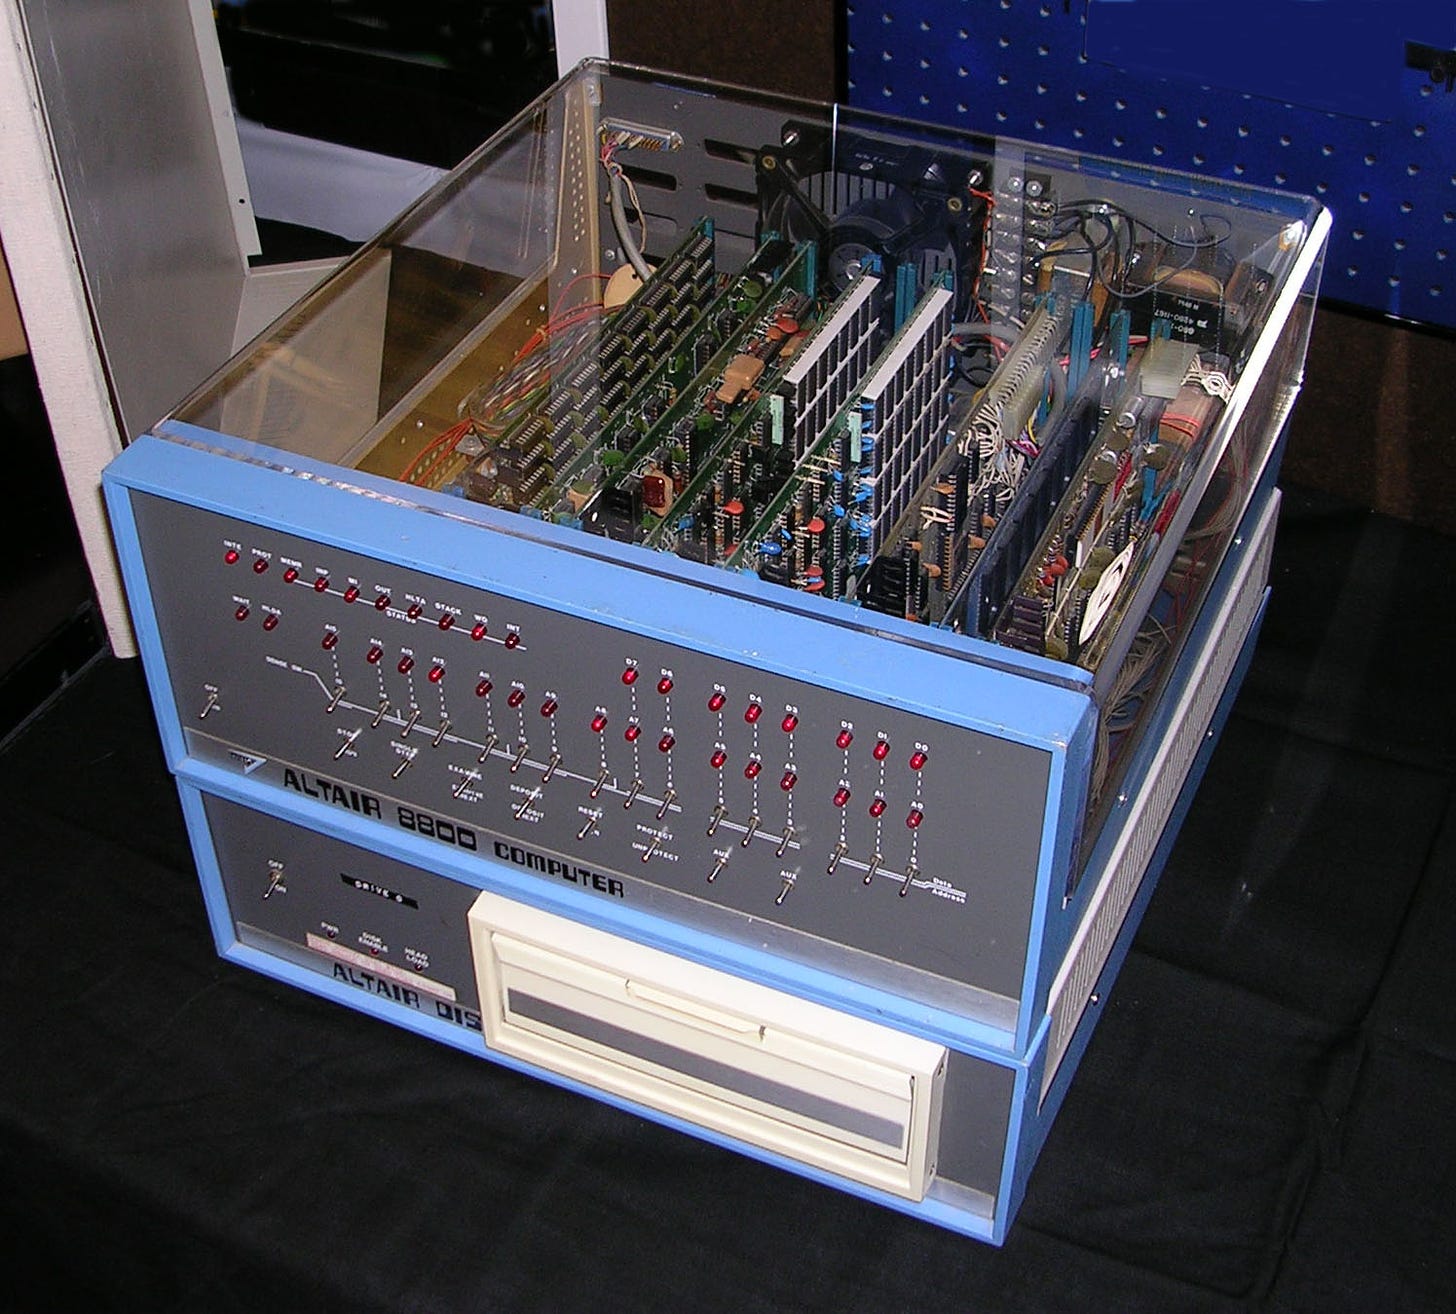 The Altair 8800, a boxy computer with red LEDs on the front and a cleear case exposing circuitry